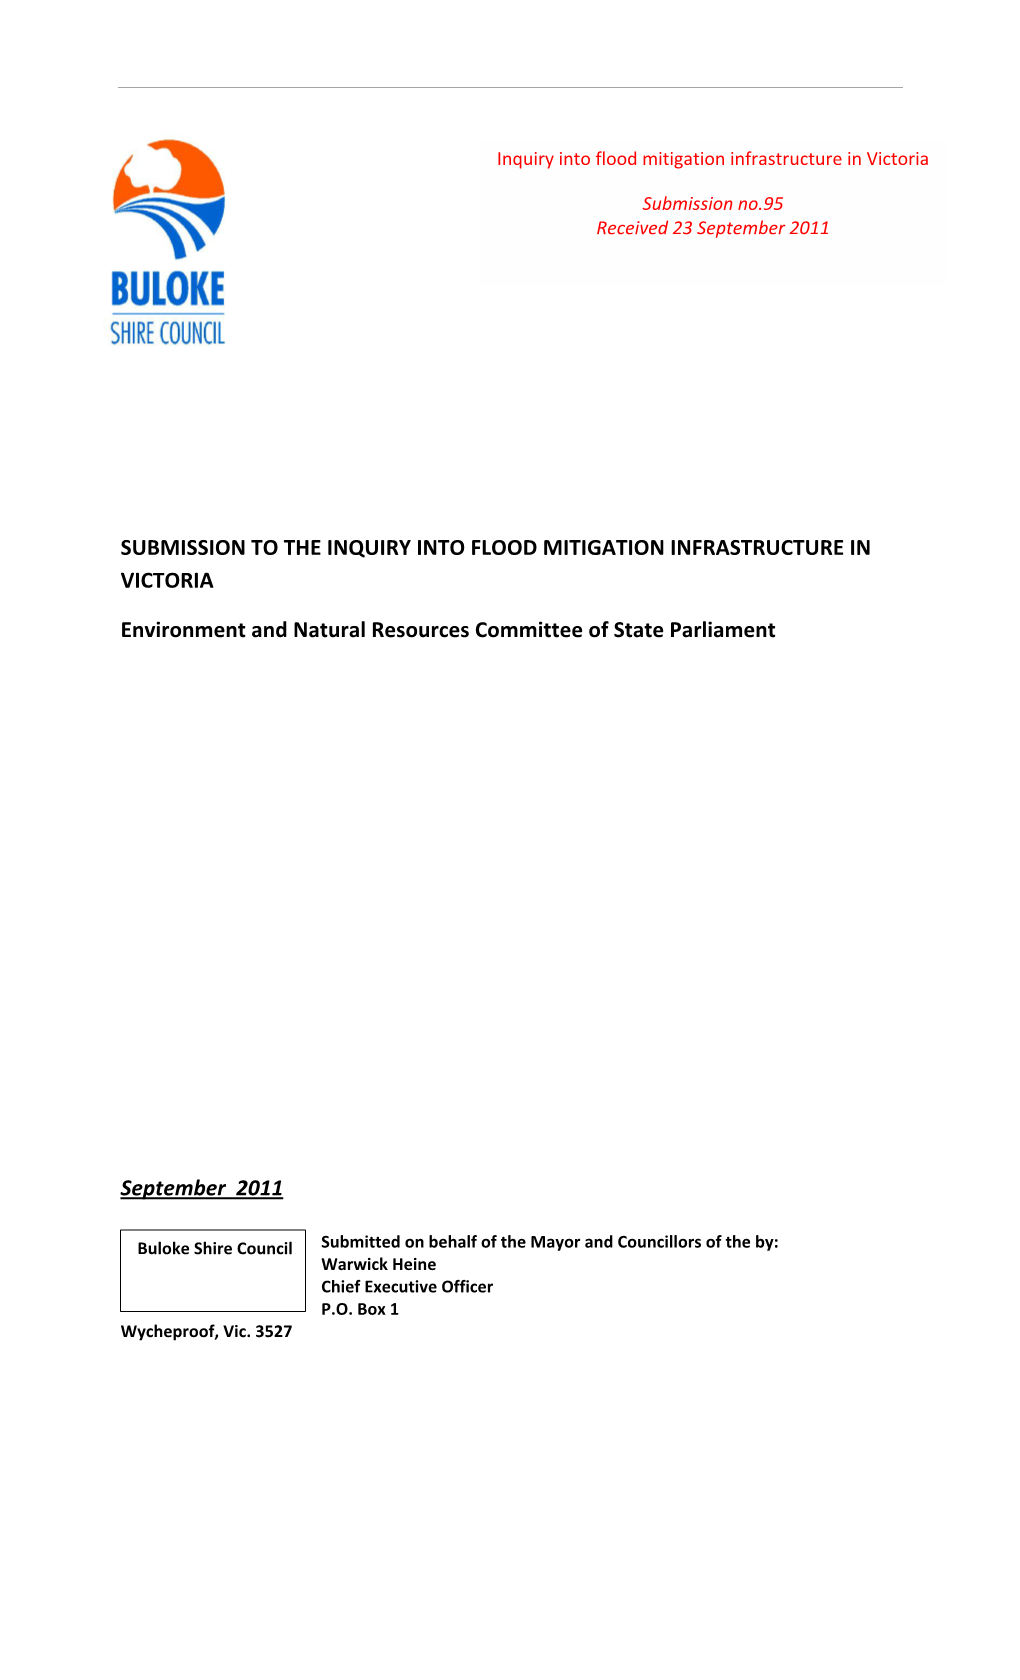 Submission to the Inquiry Into Flood Mitigation Infrastructure in Victoria